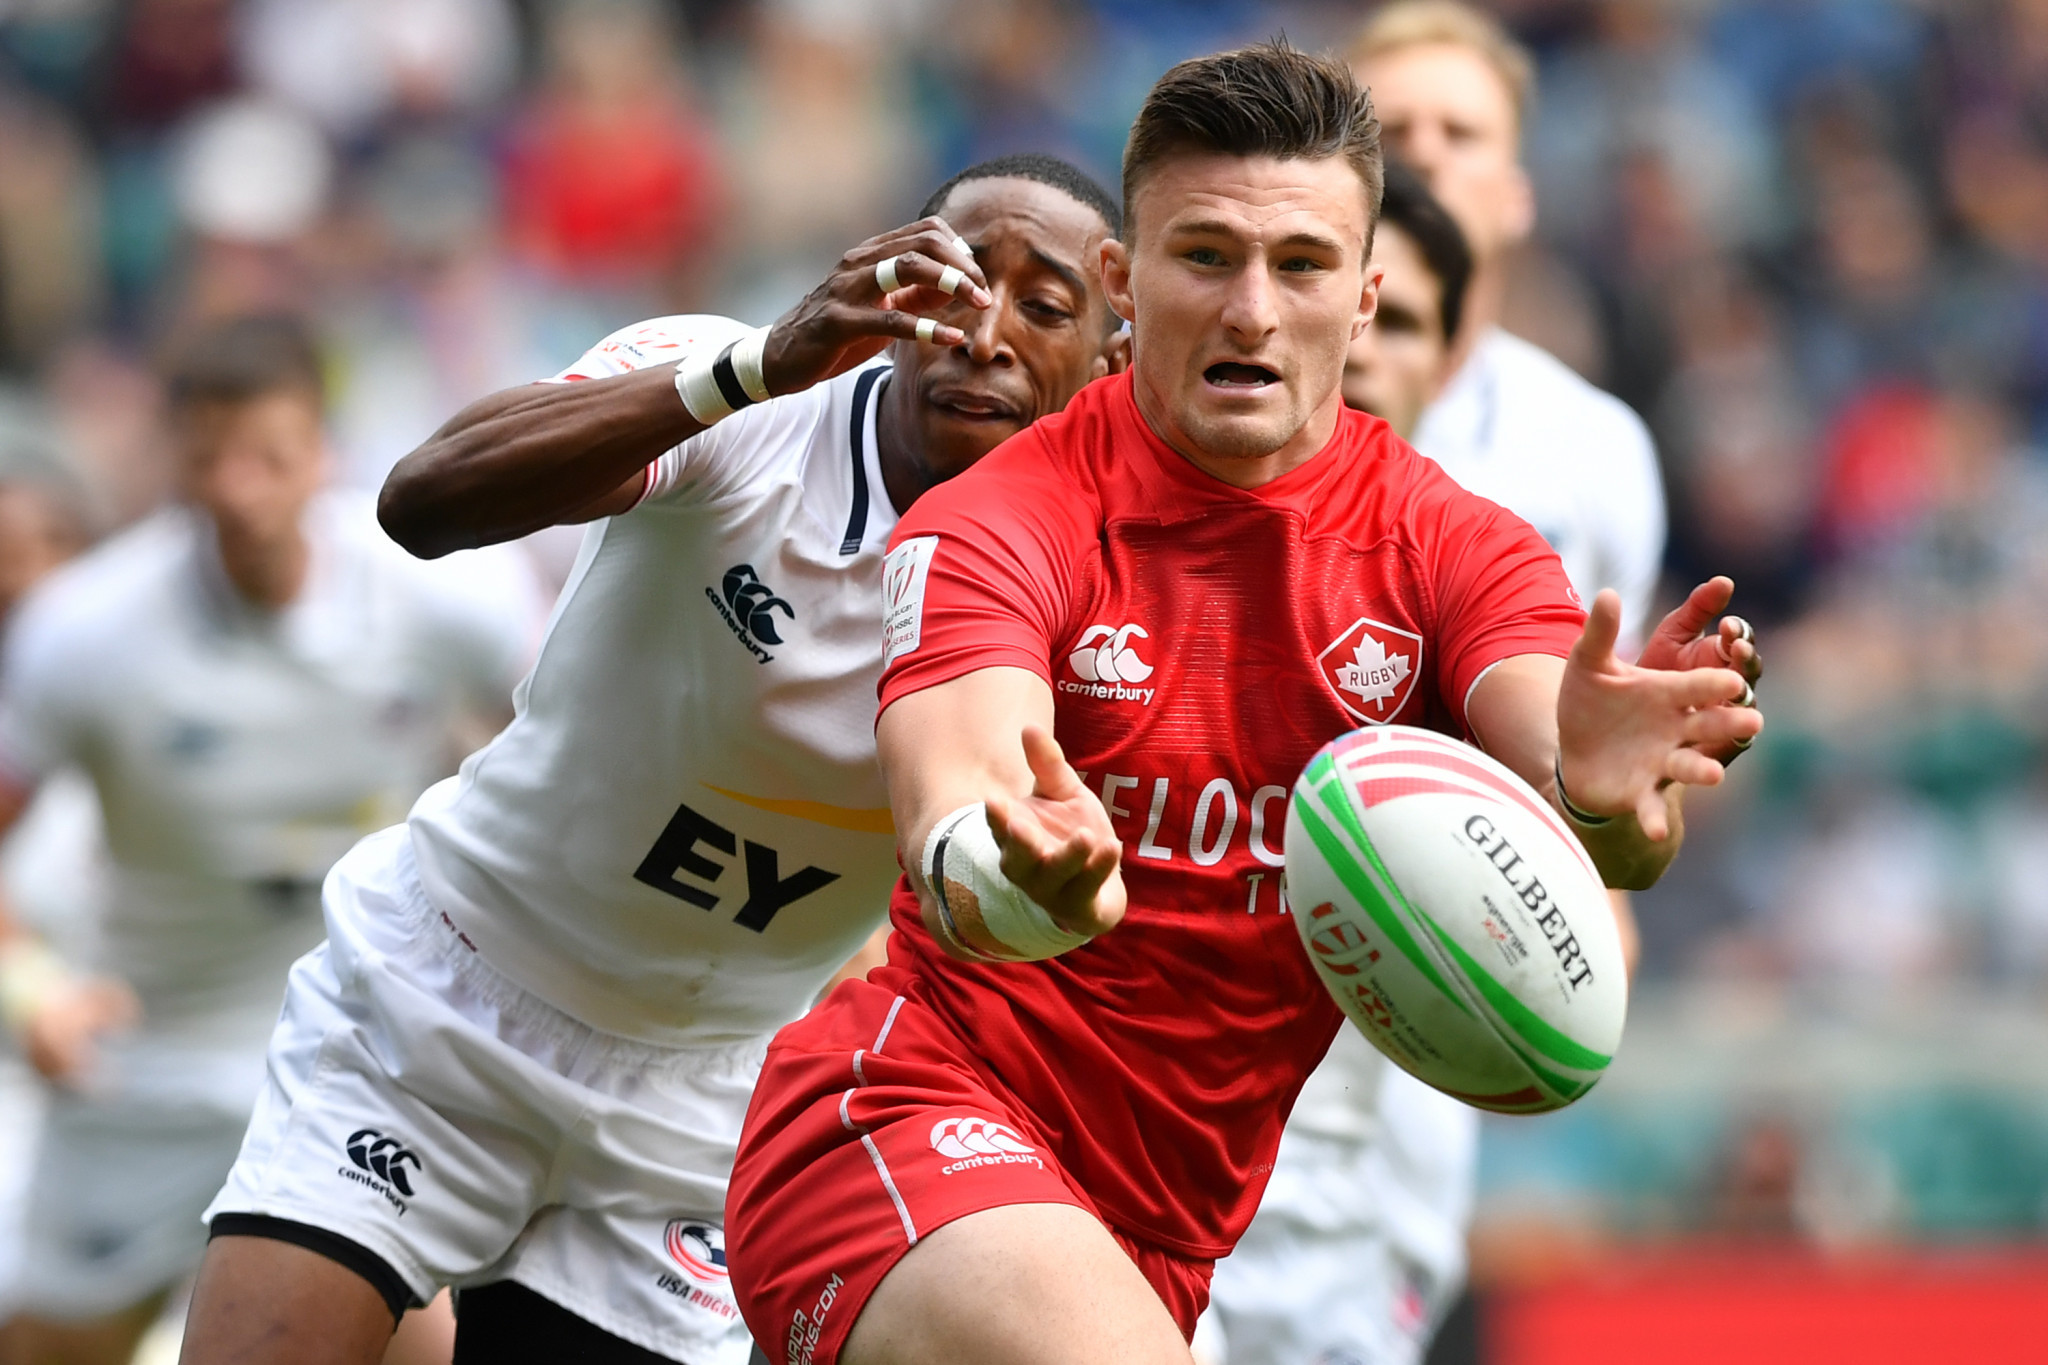 Canada's men aim to make most of second chance for Tokyo 2020 rugby sevens qualification